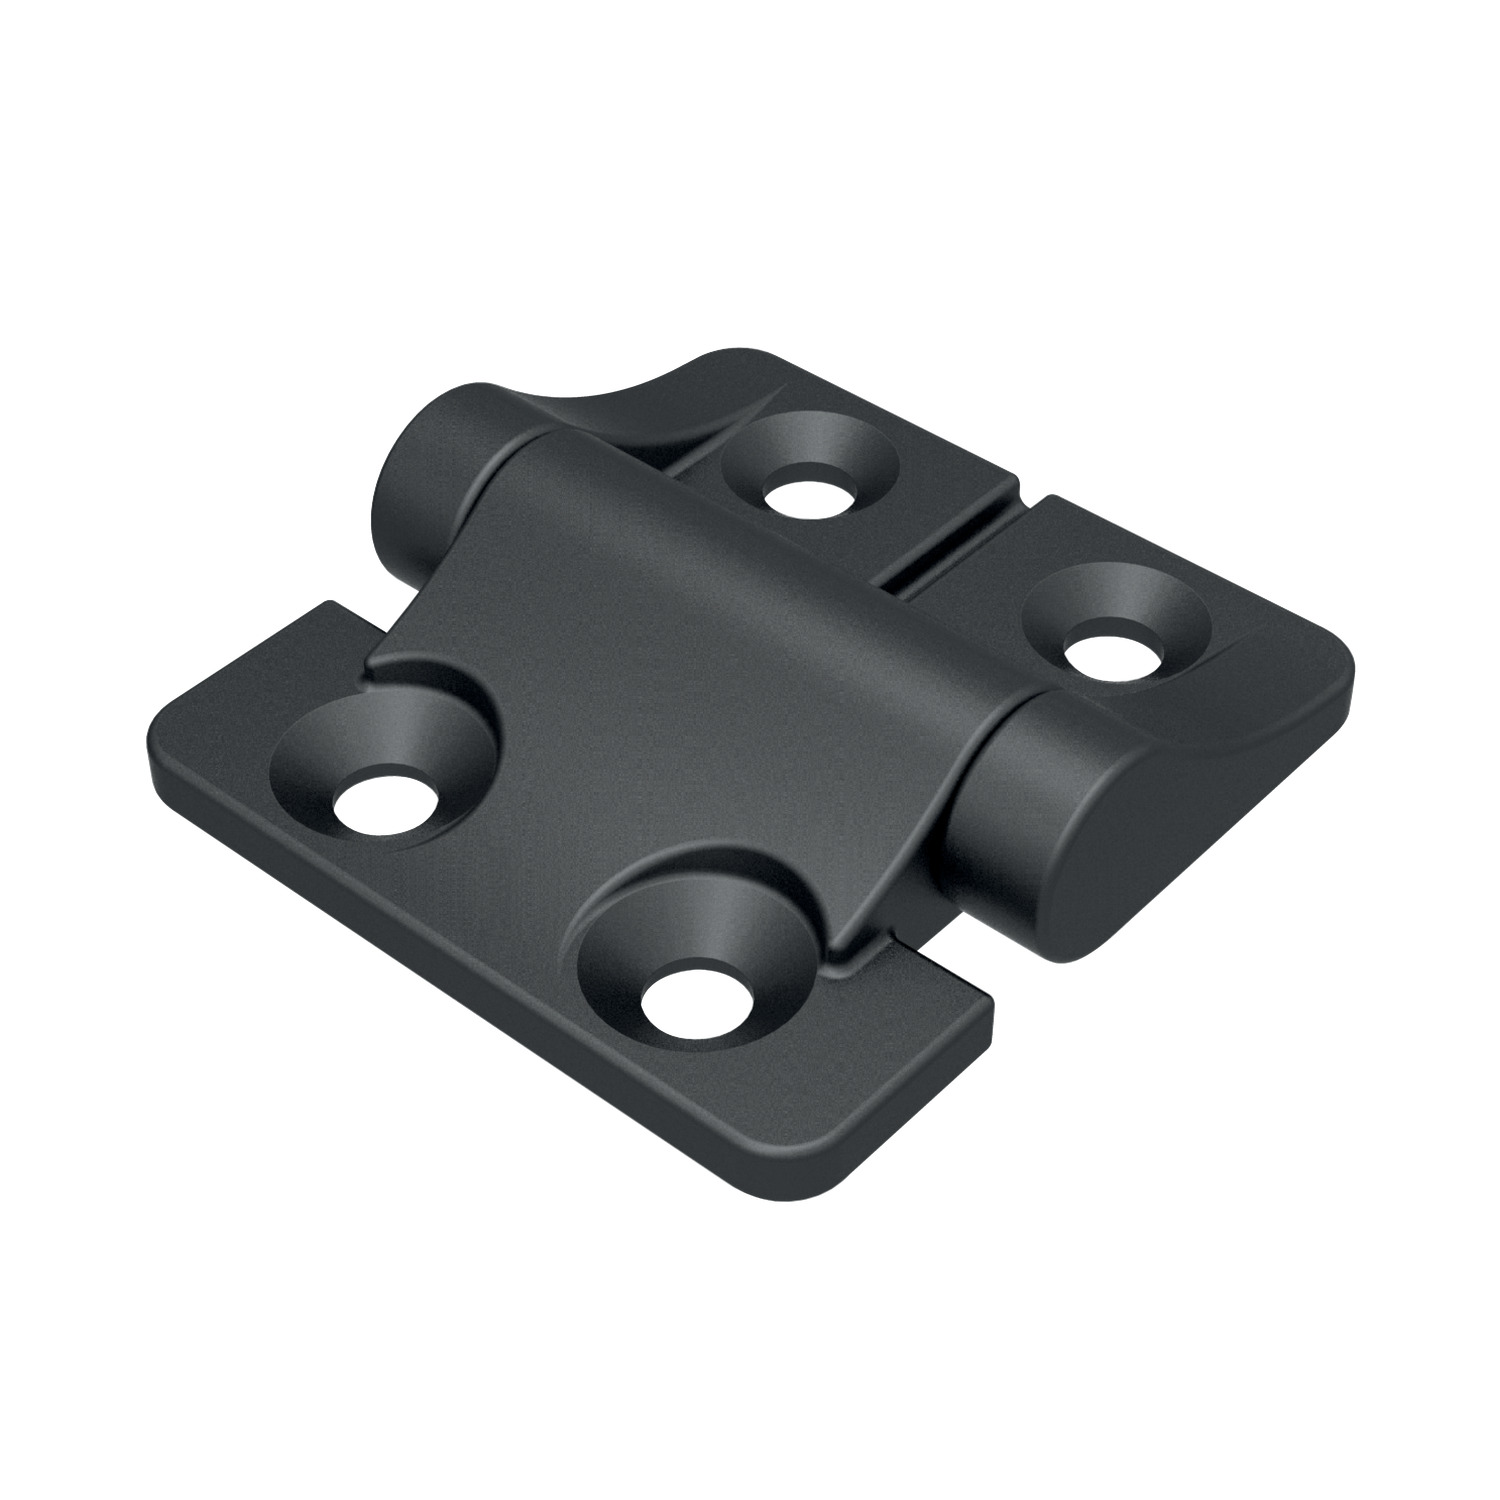 Friction Hinges - Black Black asymmetric torque friction hinges with a torque of 0,0 - 3,5 Nm. Countersunk and plain 